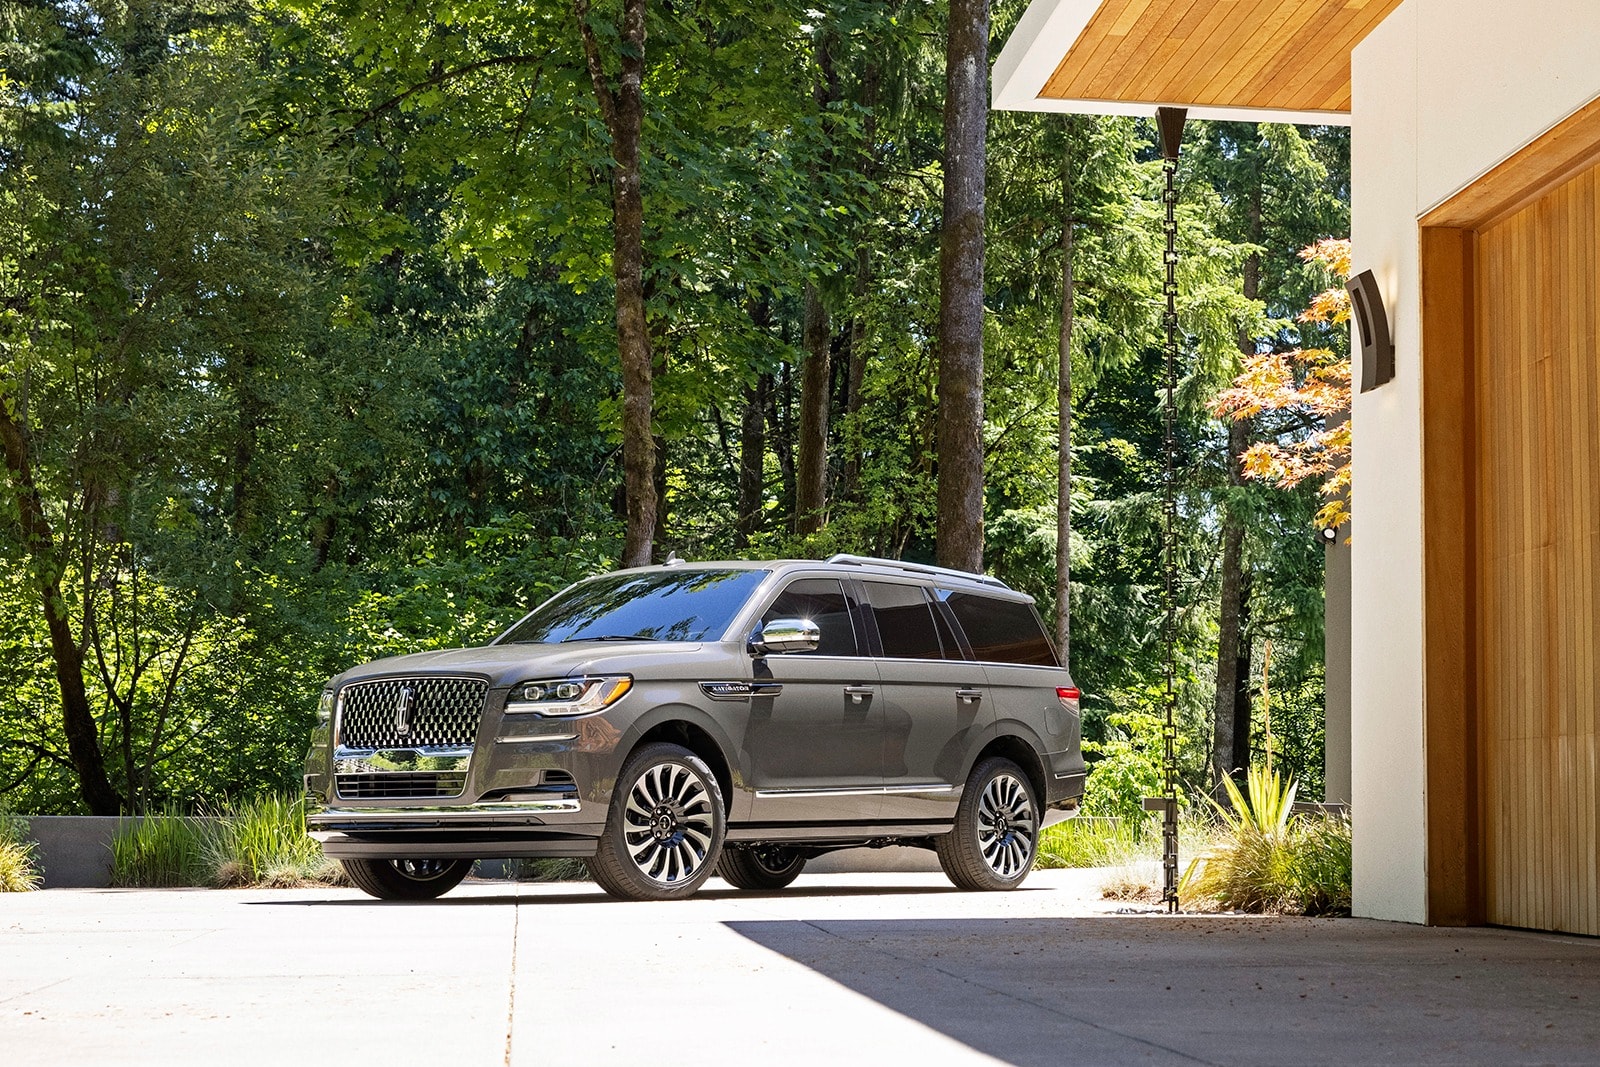 Driven: 2022 Lincoln Navigator Adds Flash but Still Needs to Fine-Tune Some Basics